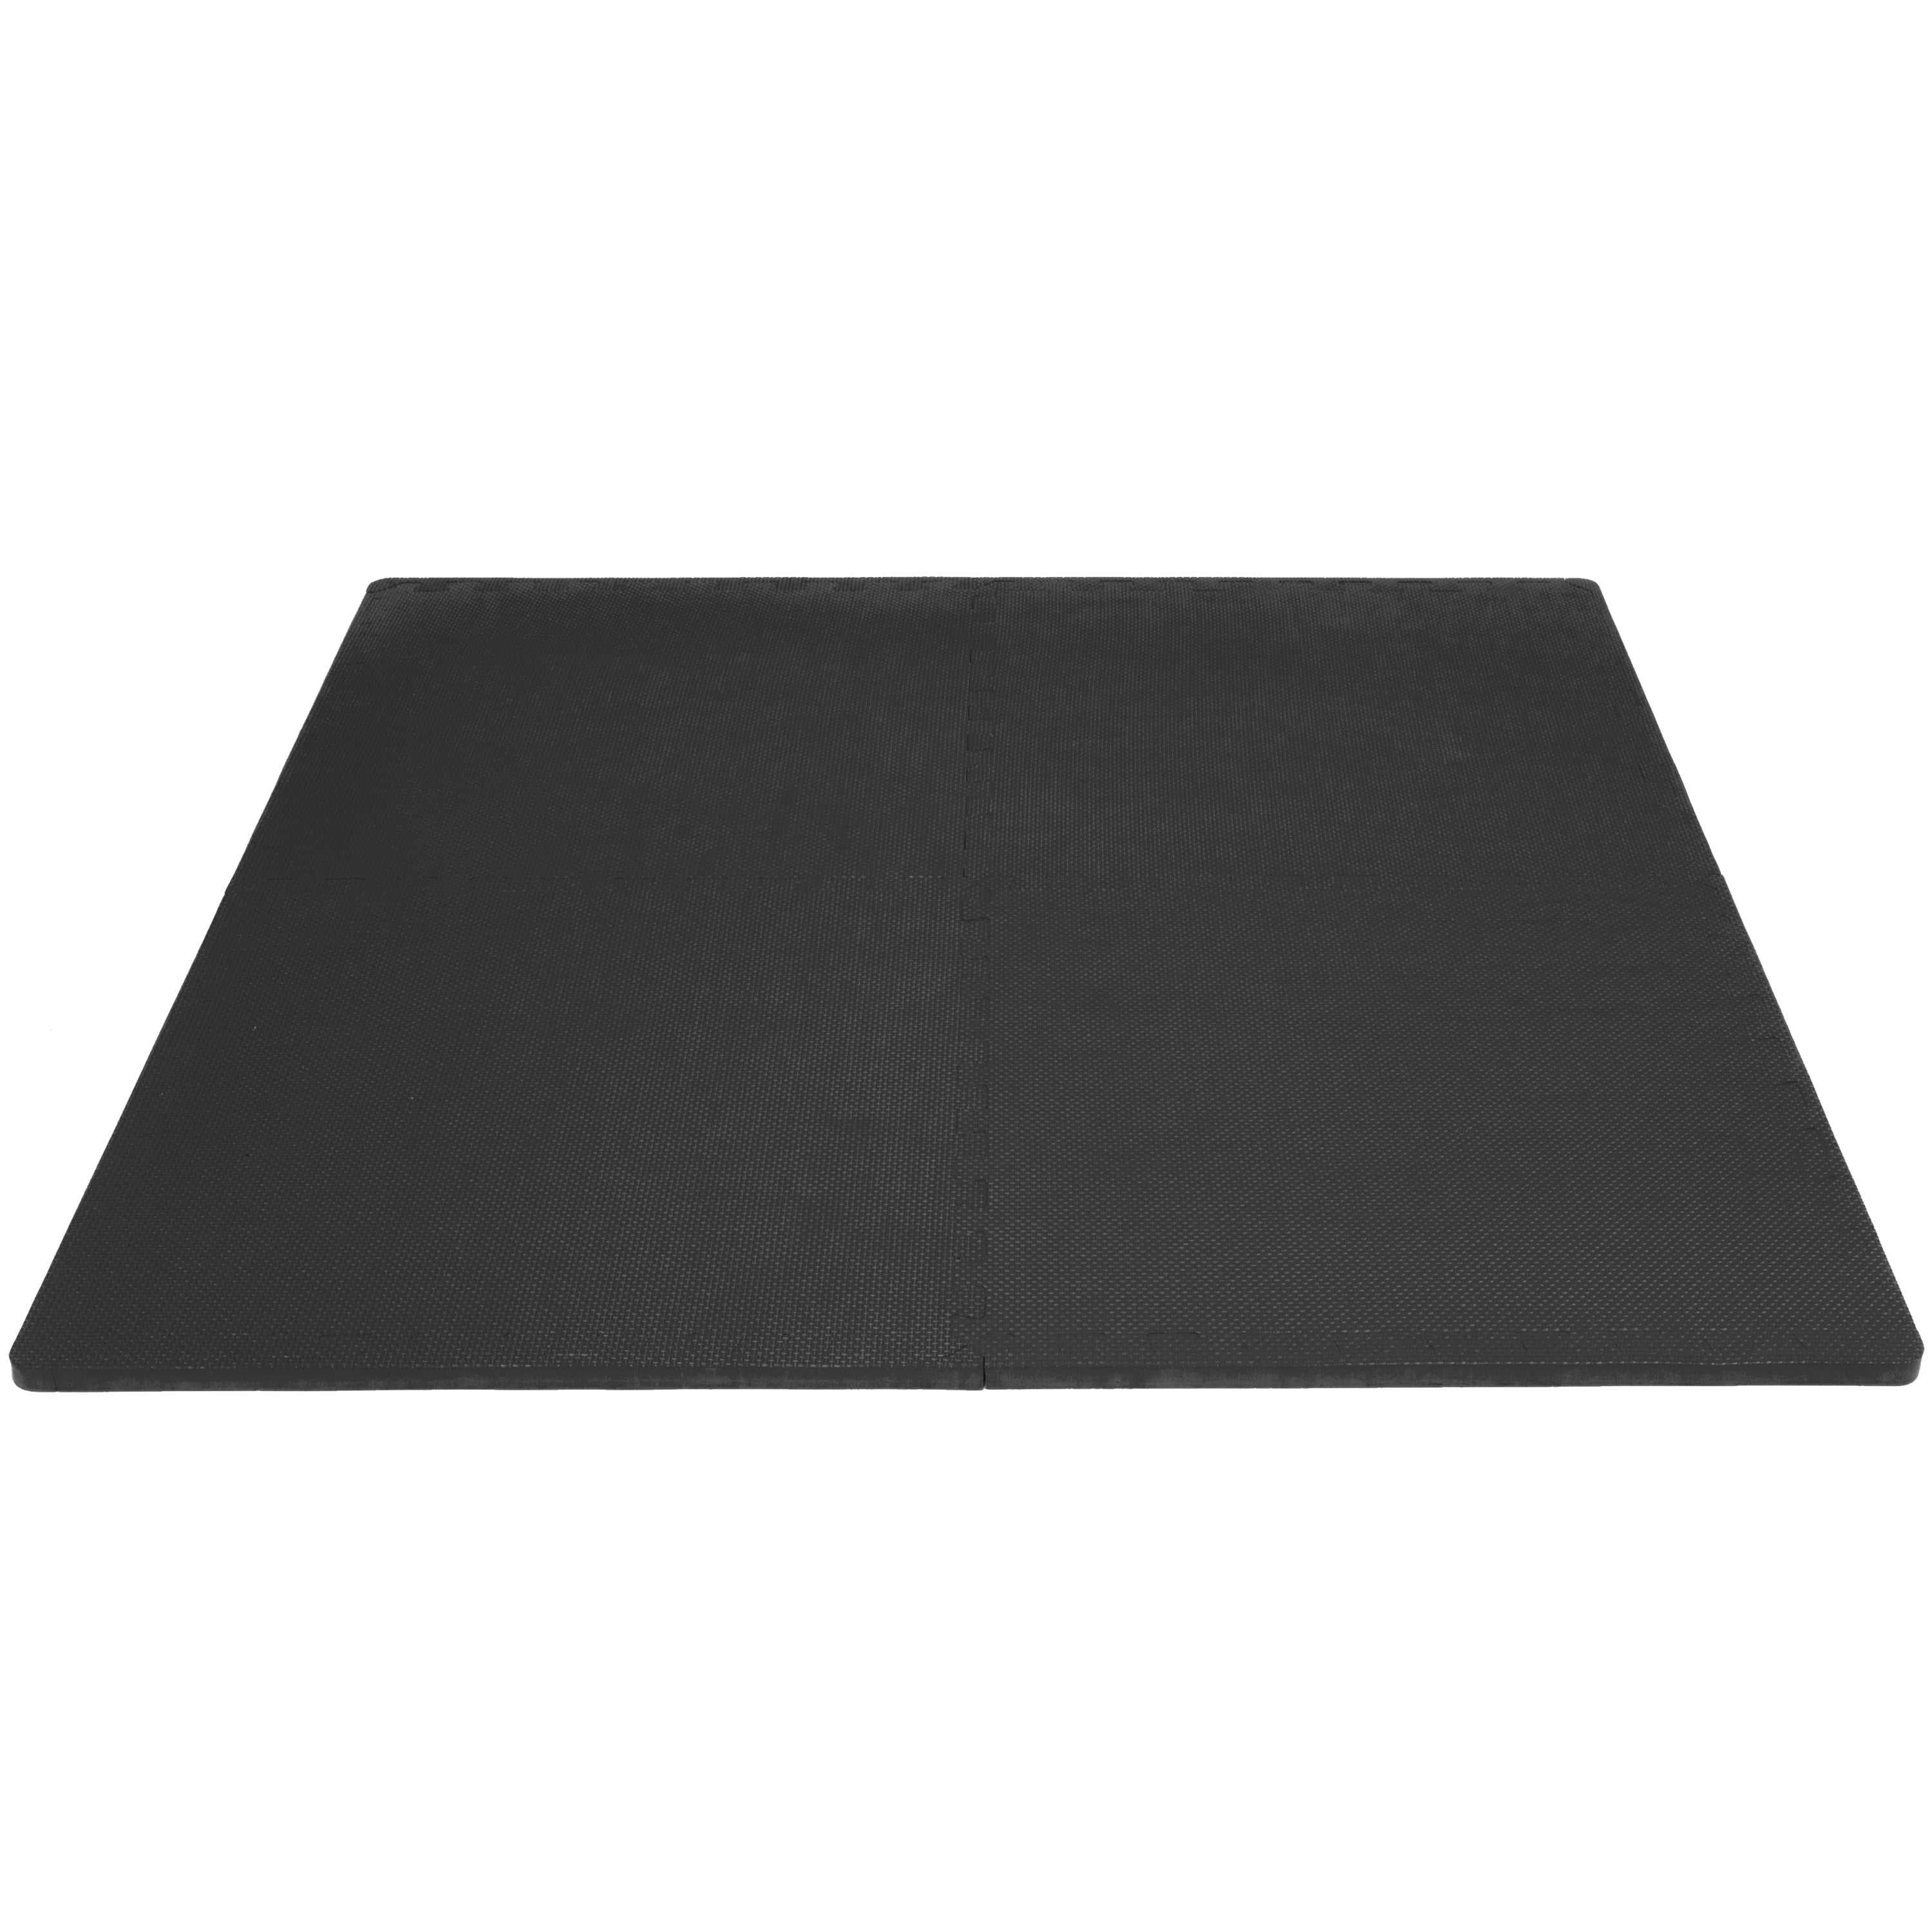 extra thick foam exercise mat